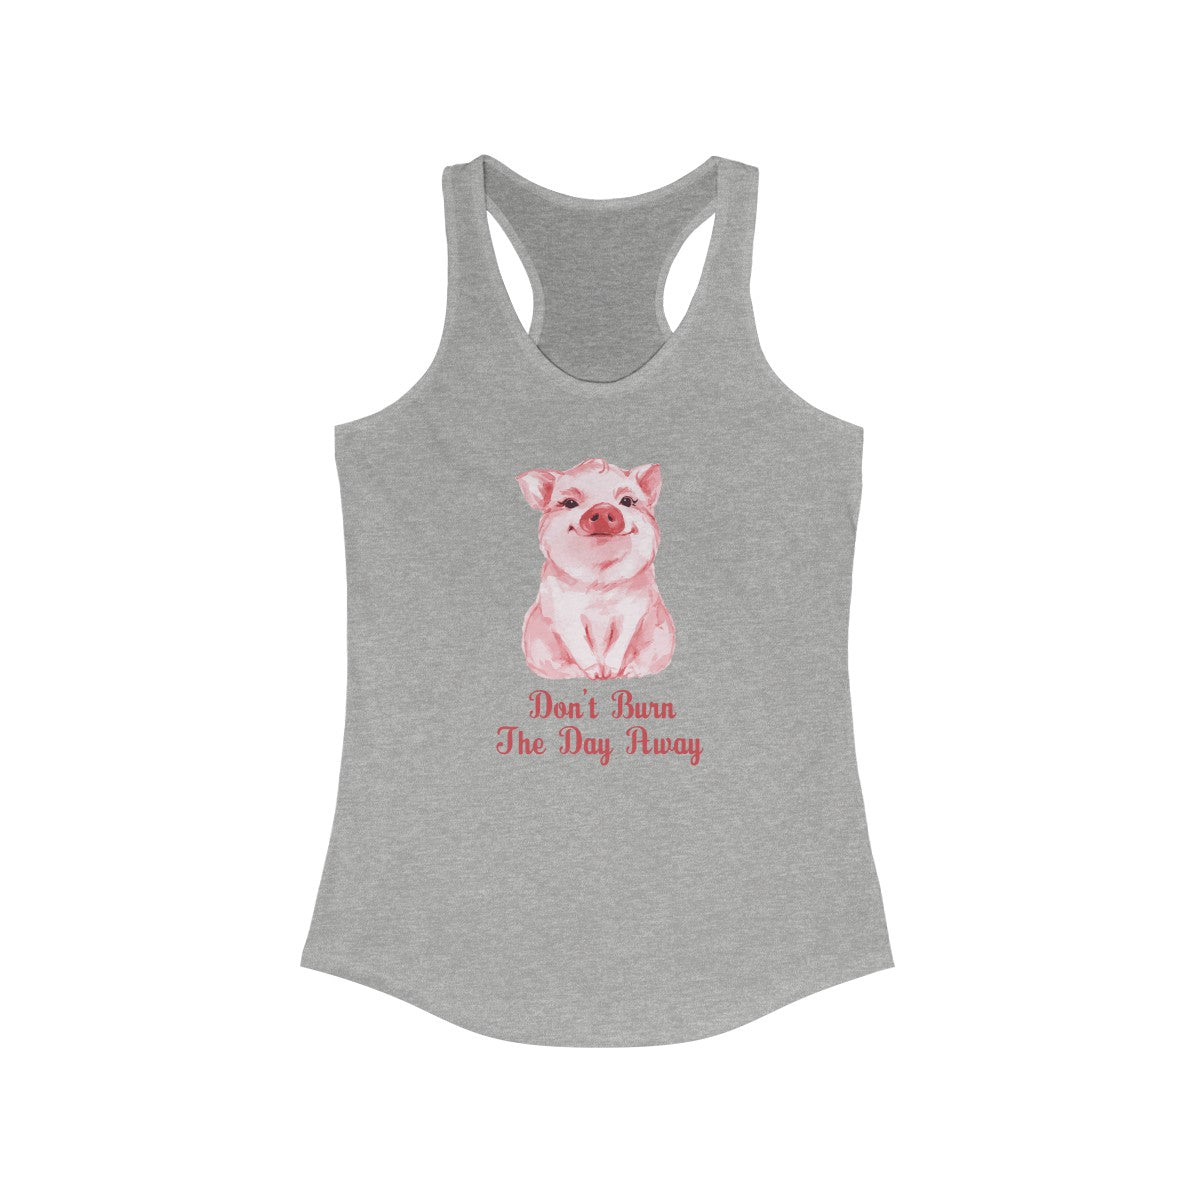 Don't Burn The Day Tank Top